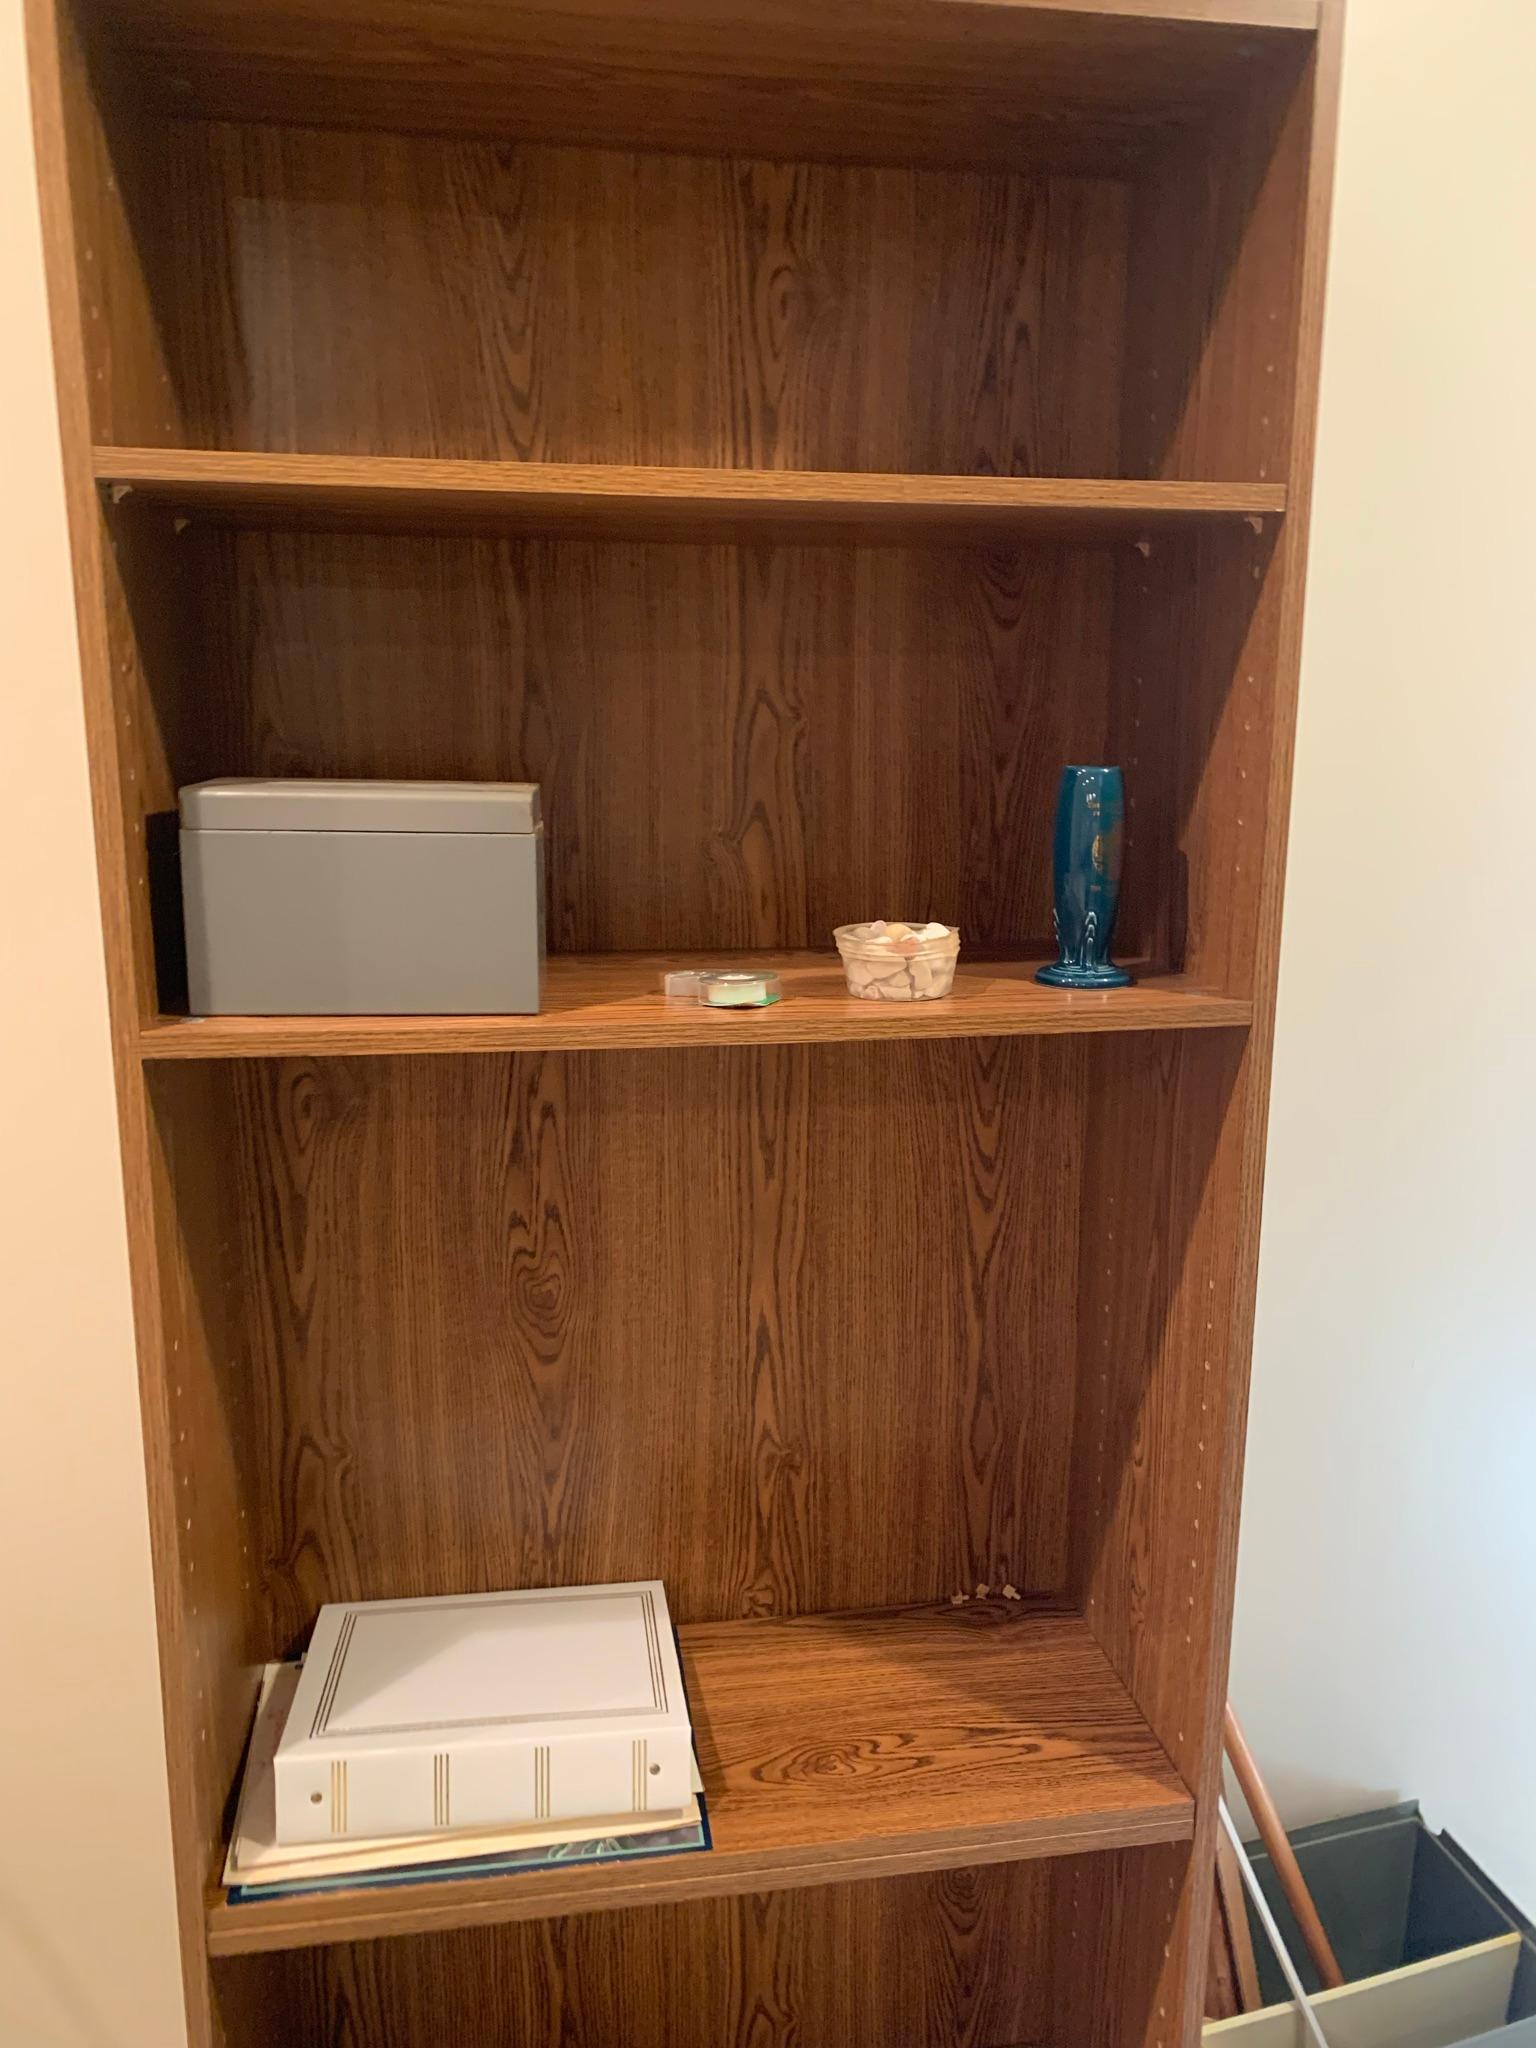 Clean Out Basement Room - Sofa, Side Stand, Shelves, Cassette Tapes, Bathroom Items & More